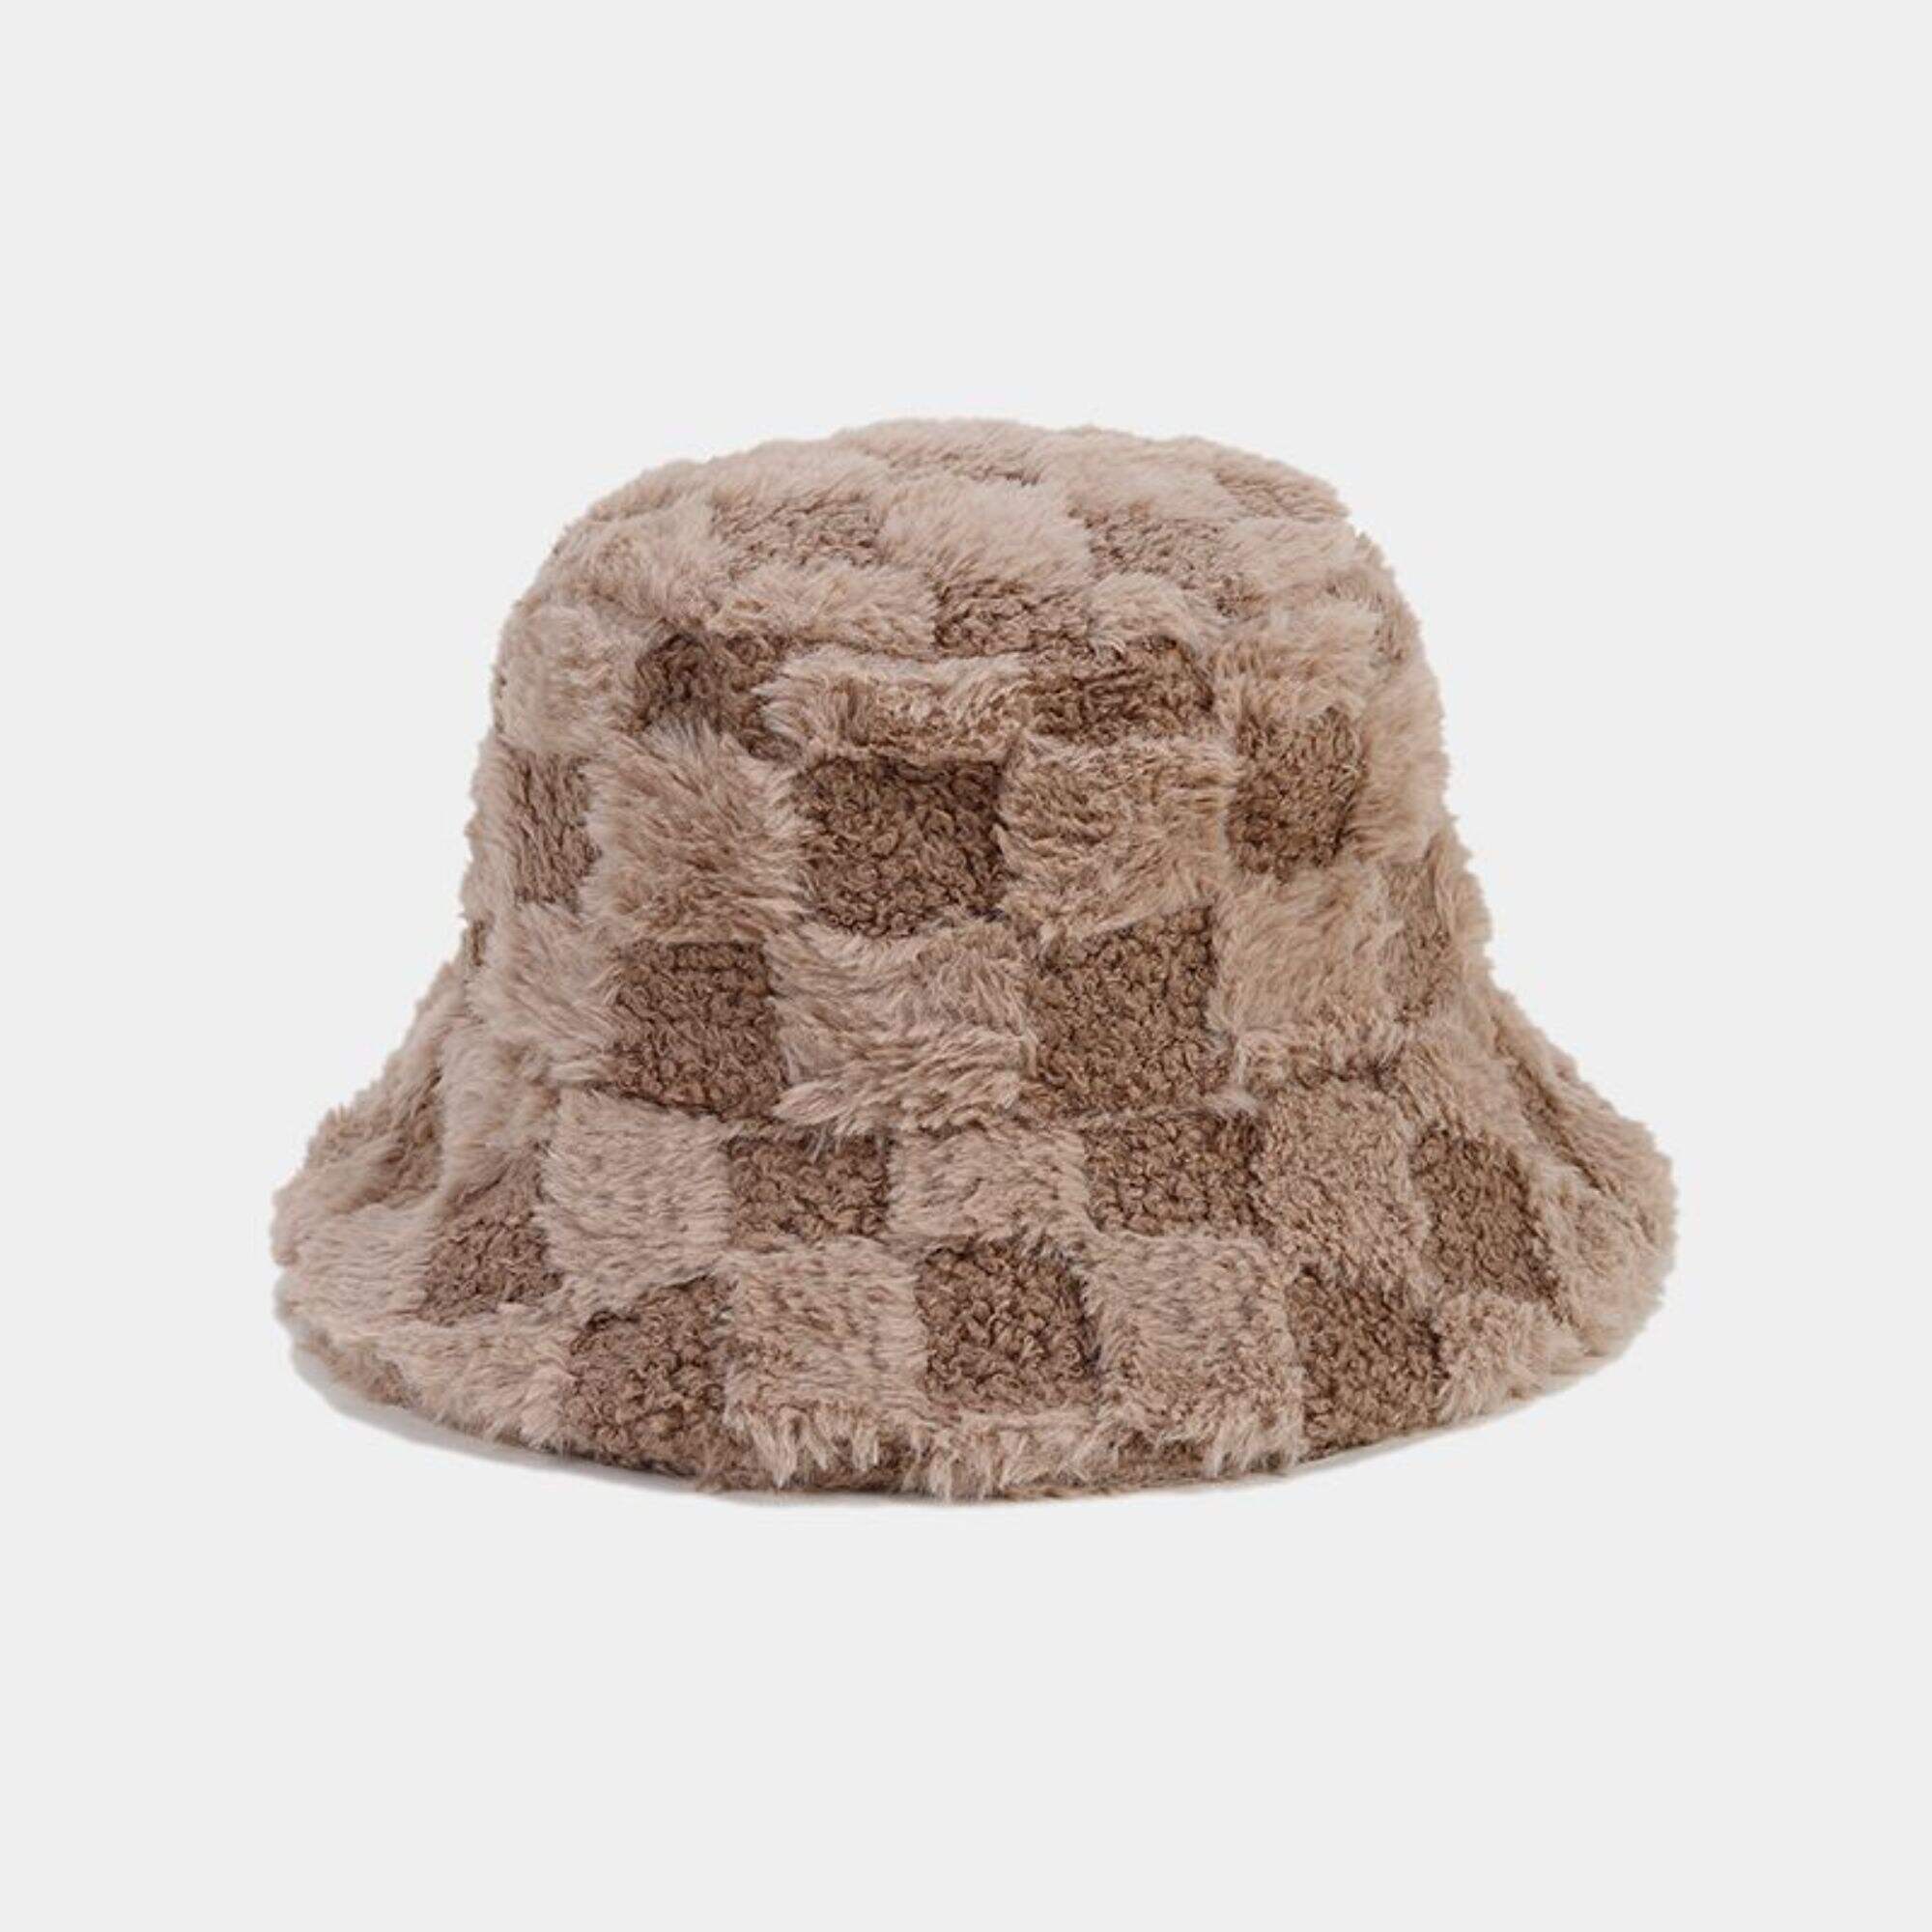 Solid color checked fisherman's hat